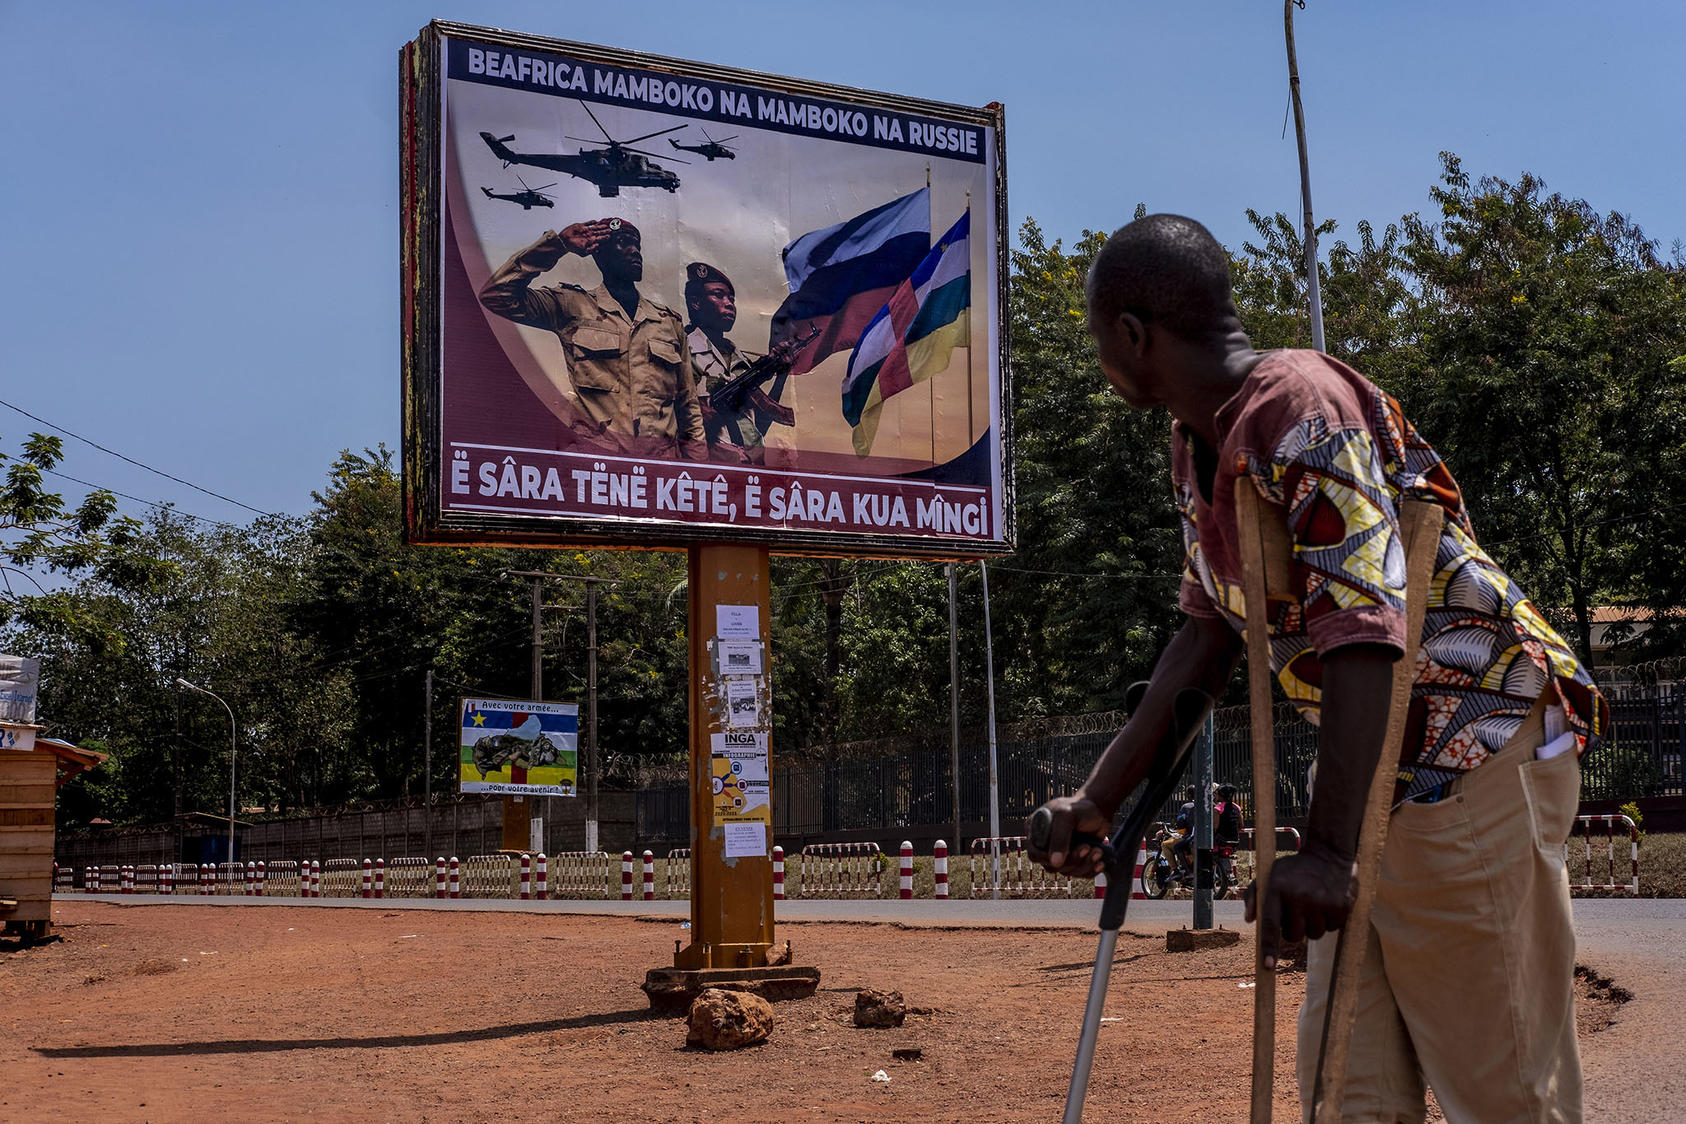 A billboard celebrates the collaboration between the Russian military and the Central African military, in Bangui, Central African Republic, April 28, 2019. (Ashley Gilbertson/The New York Times)